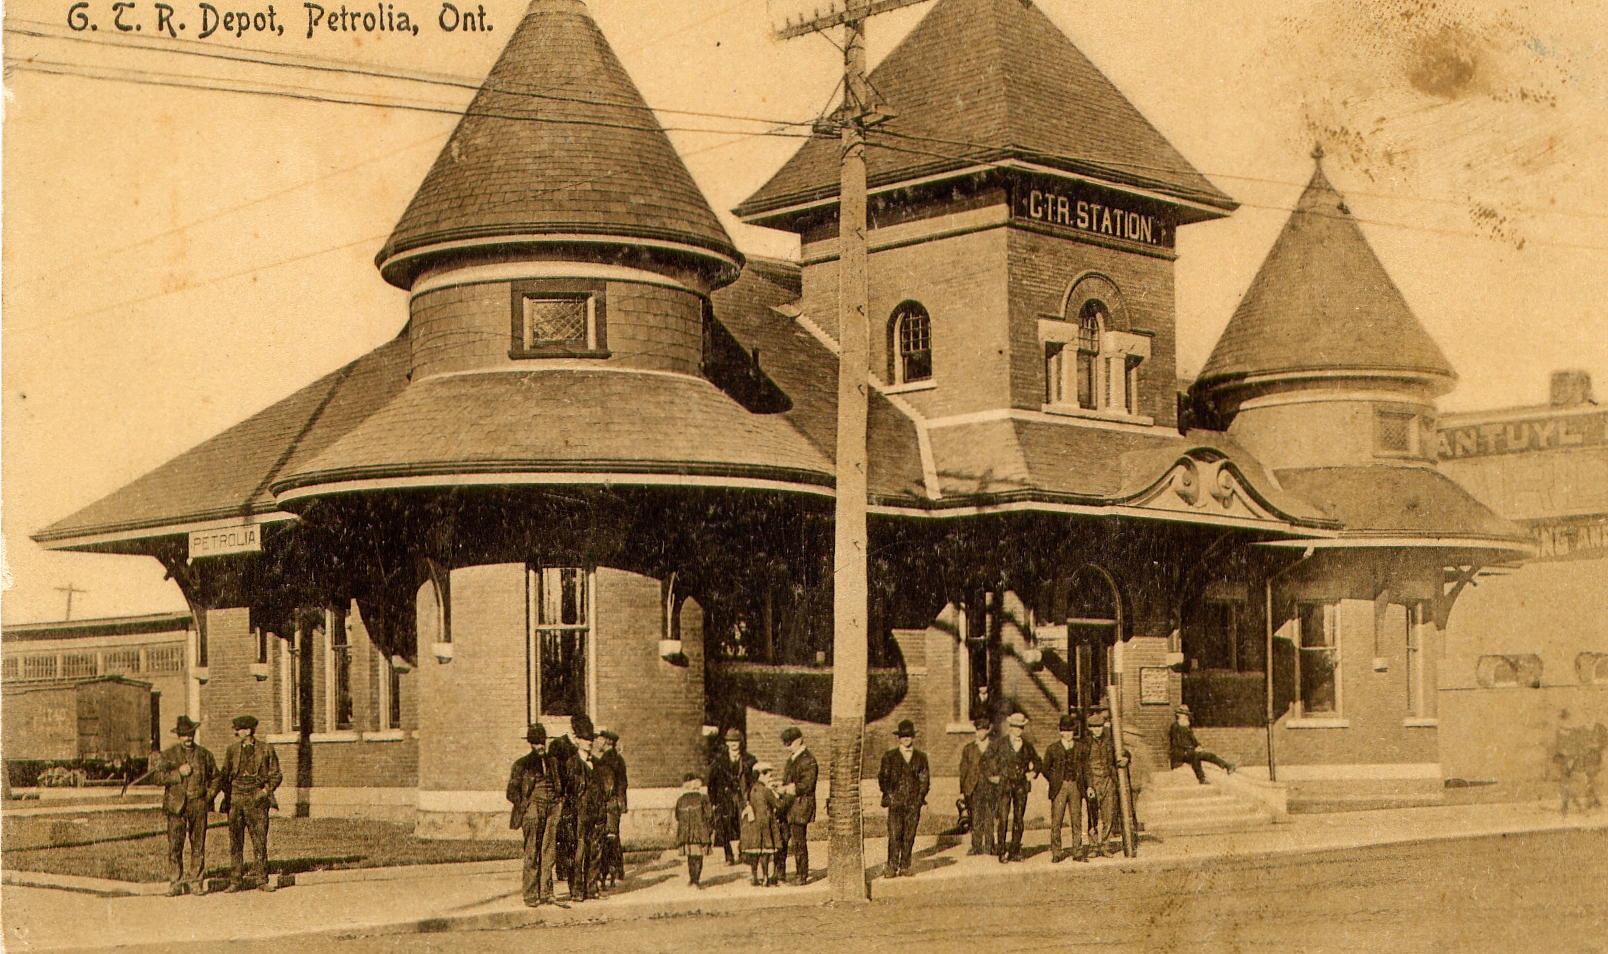 The Grand Trunk Railway Station, today